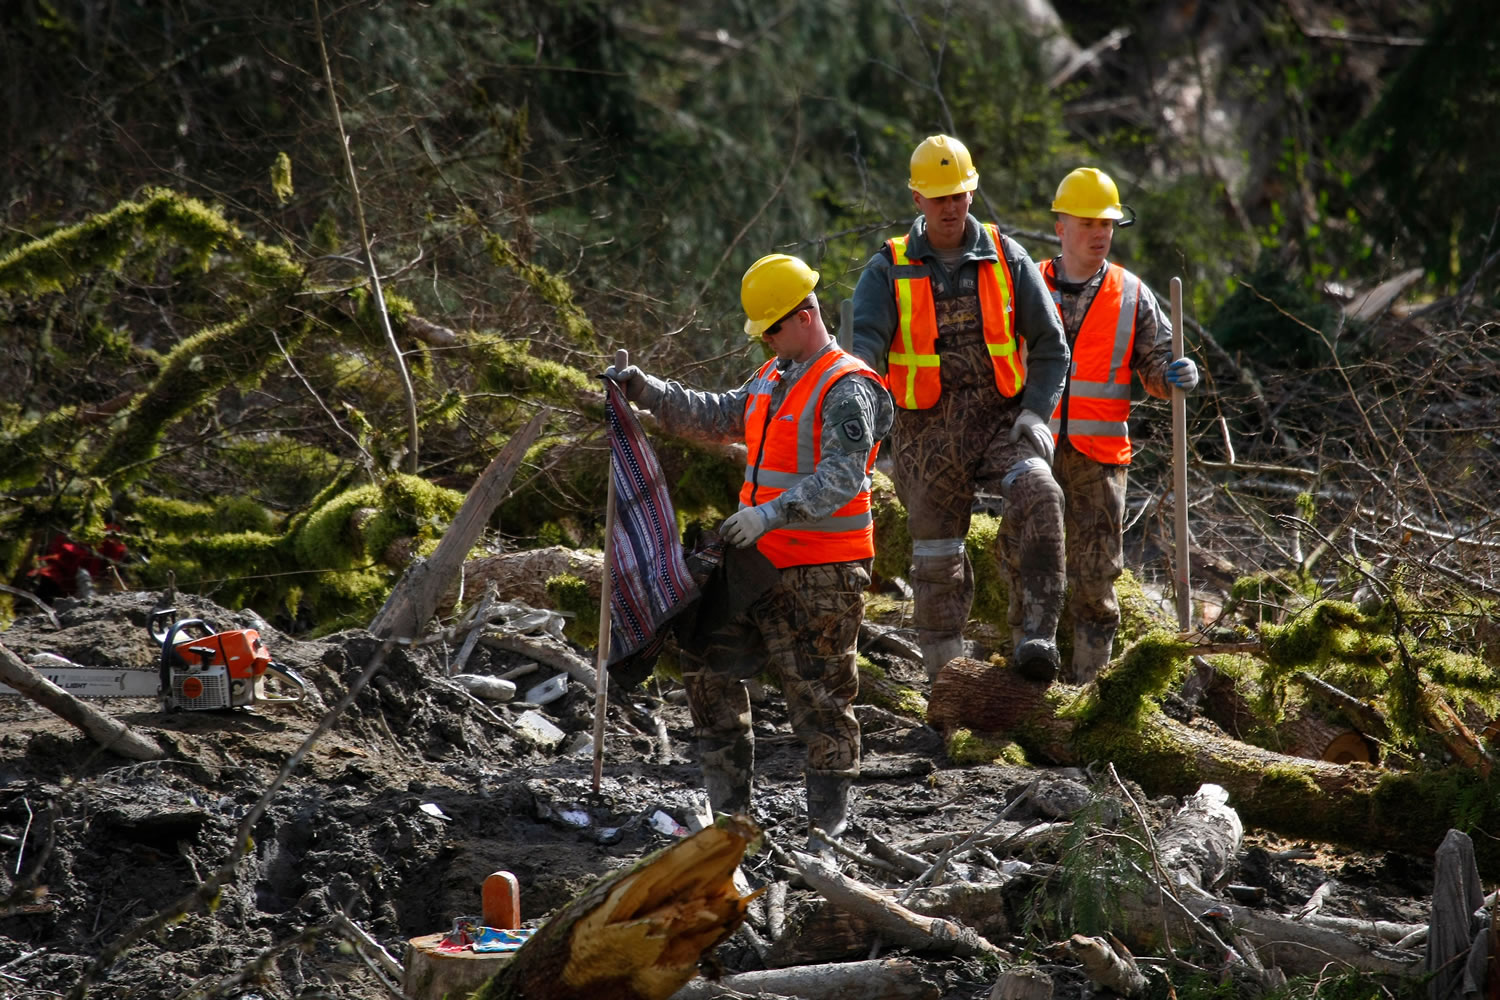 Members of the Washington State National Guard search through debris field for personal items and bodies Wednesday, where workers continued to search through the mudslide area in Oso.